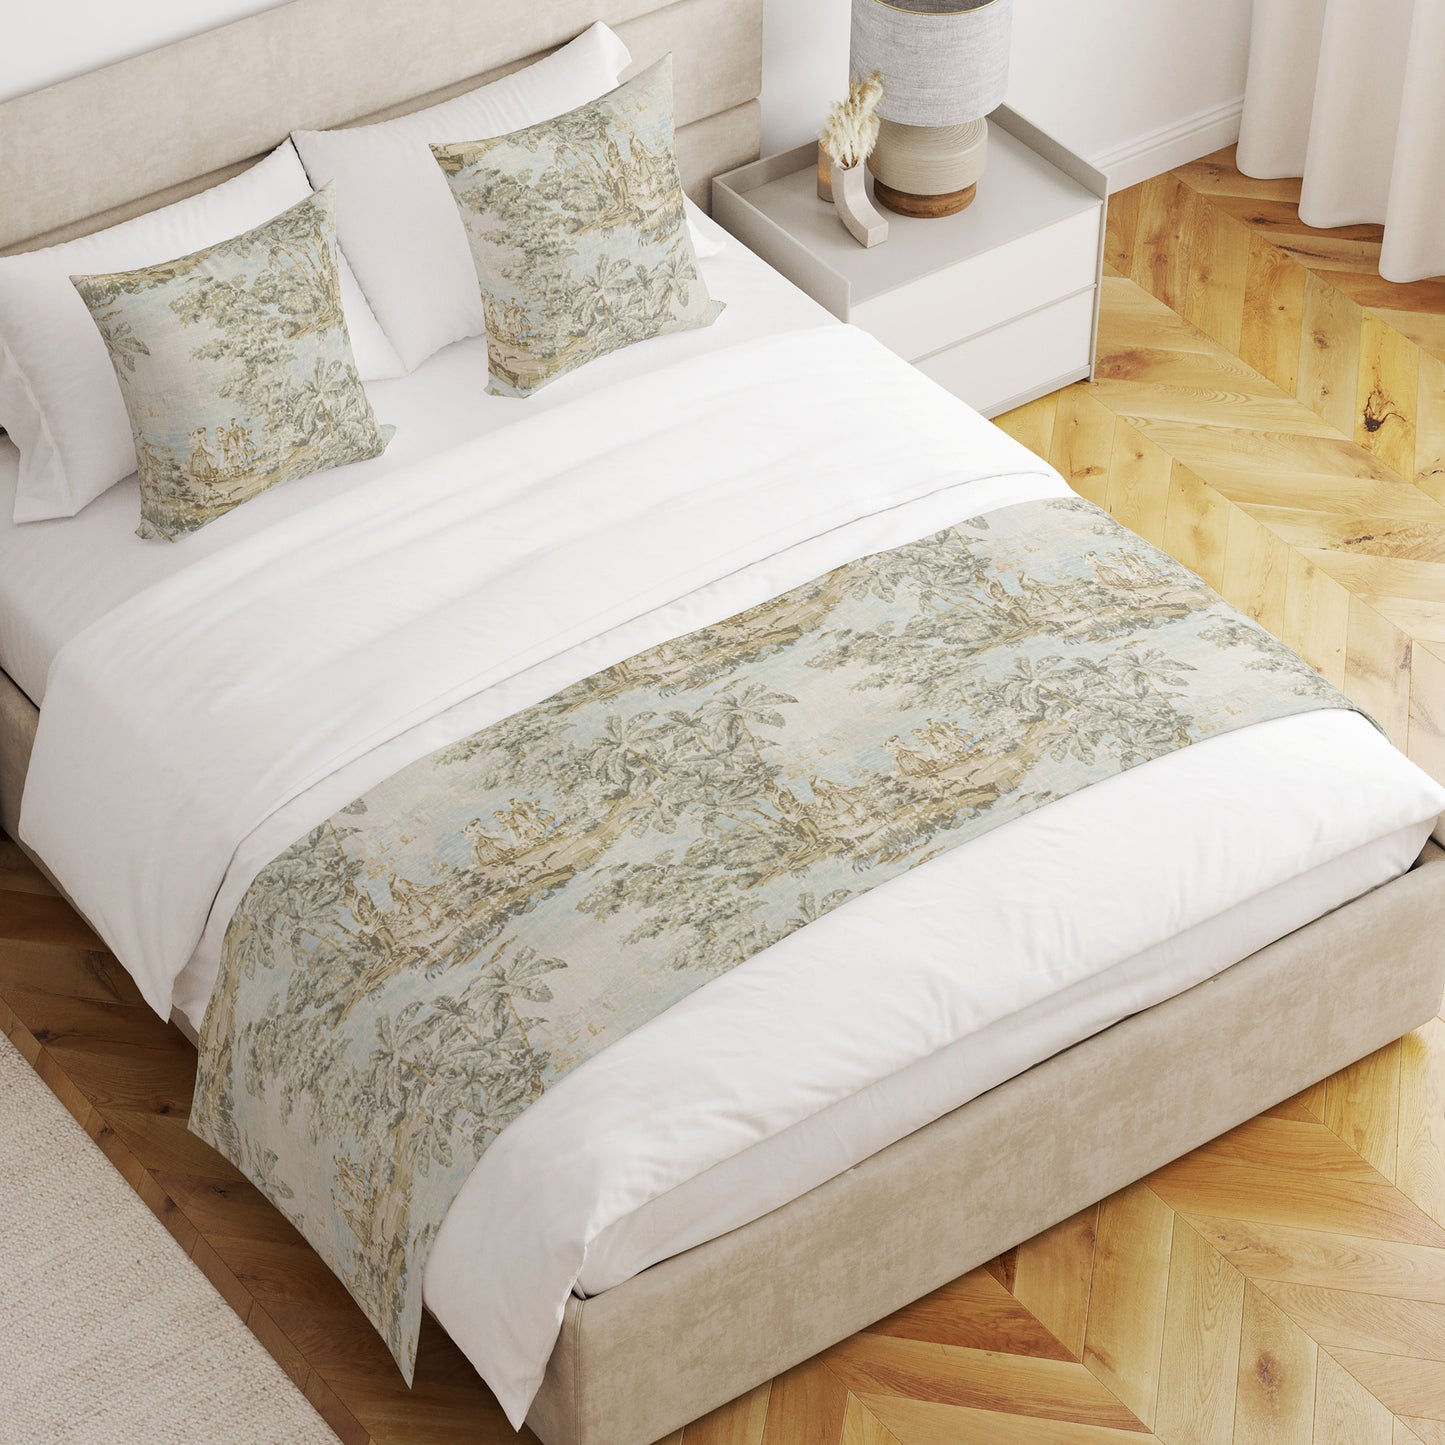 Bed Runner in Bosporus Flax Toile